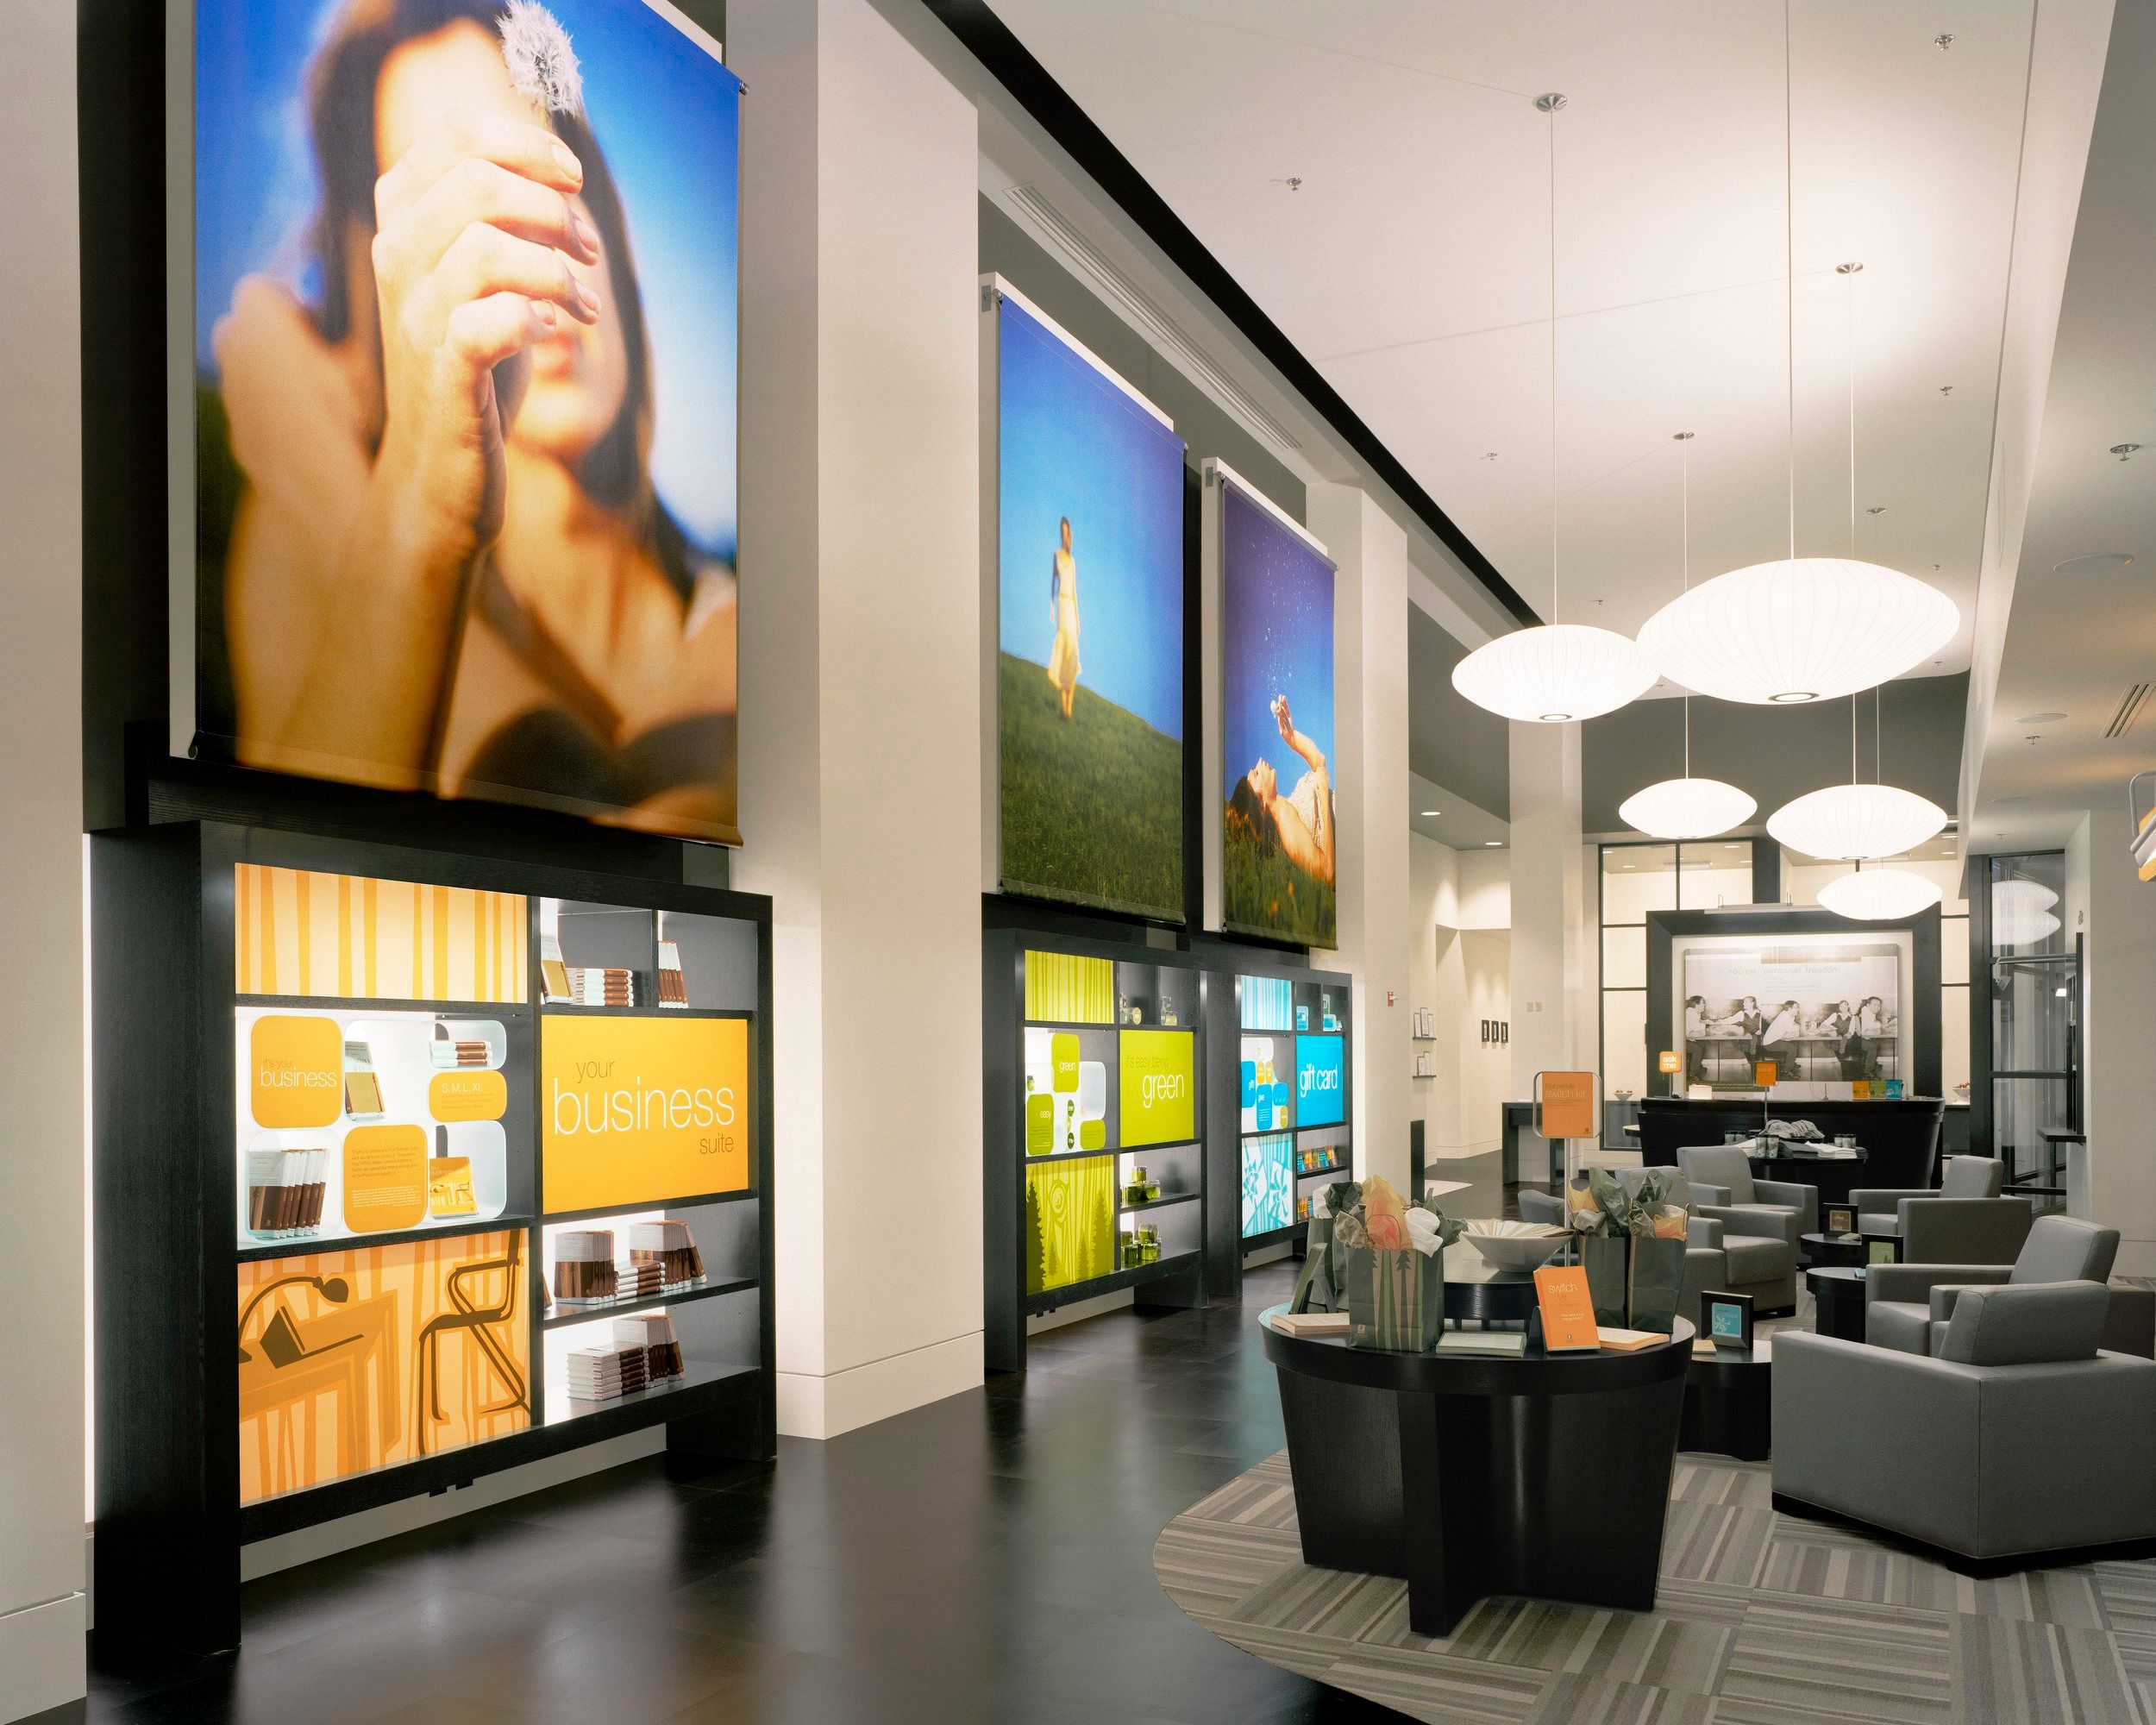 Interior of Umpqua Bank, featuring large banner images of a woman in a field, several lounge chairs, and bright colorful shelves with illustrations and products